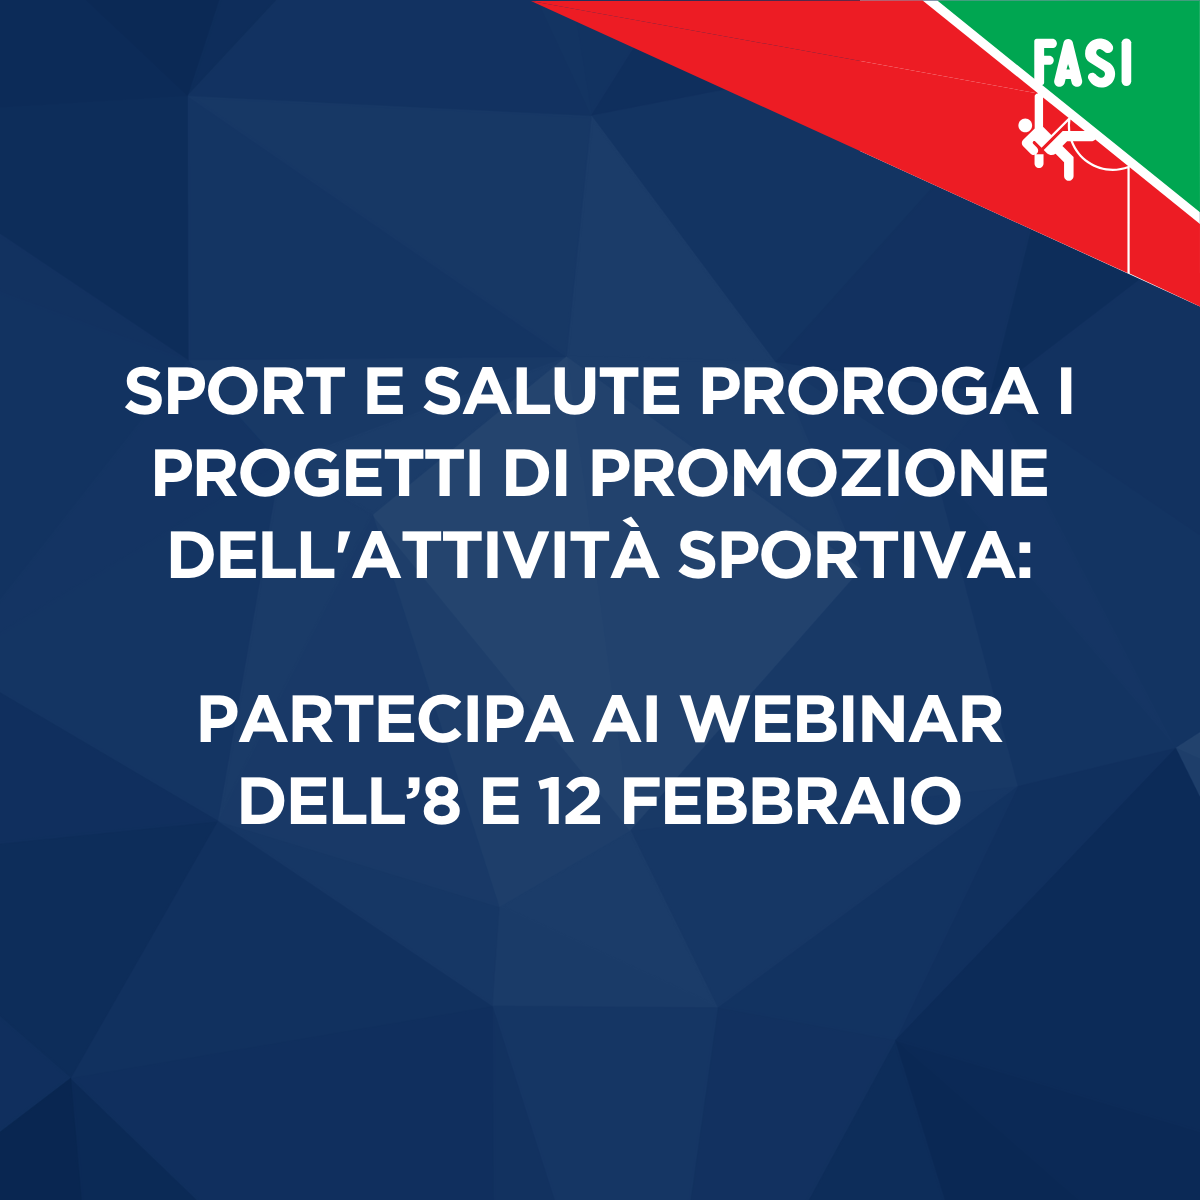 images/Proroga_progetti_Sport_Salute.png